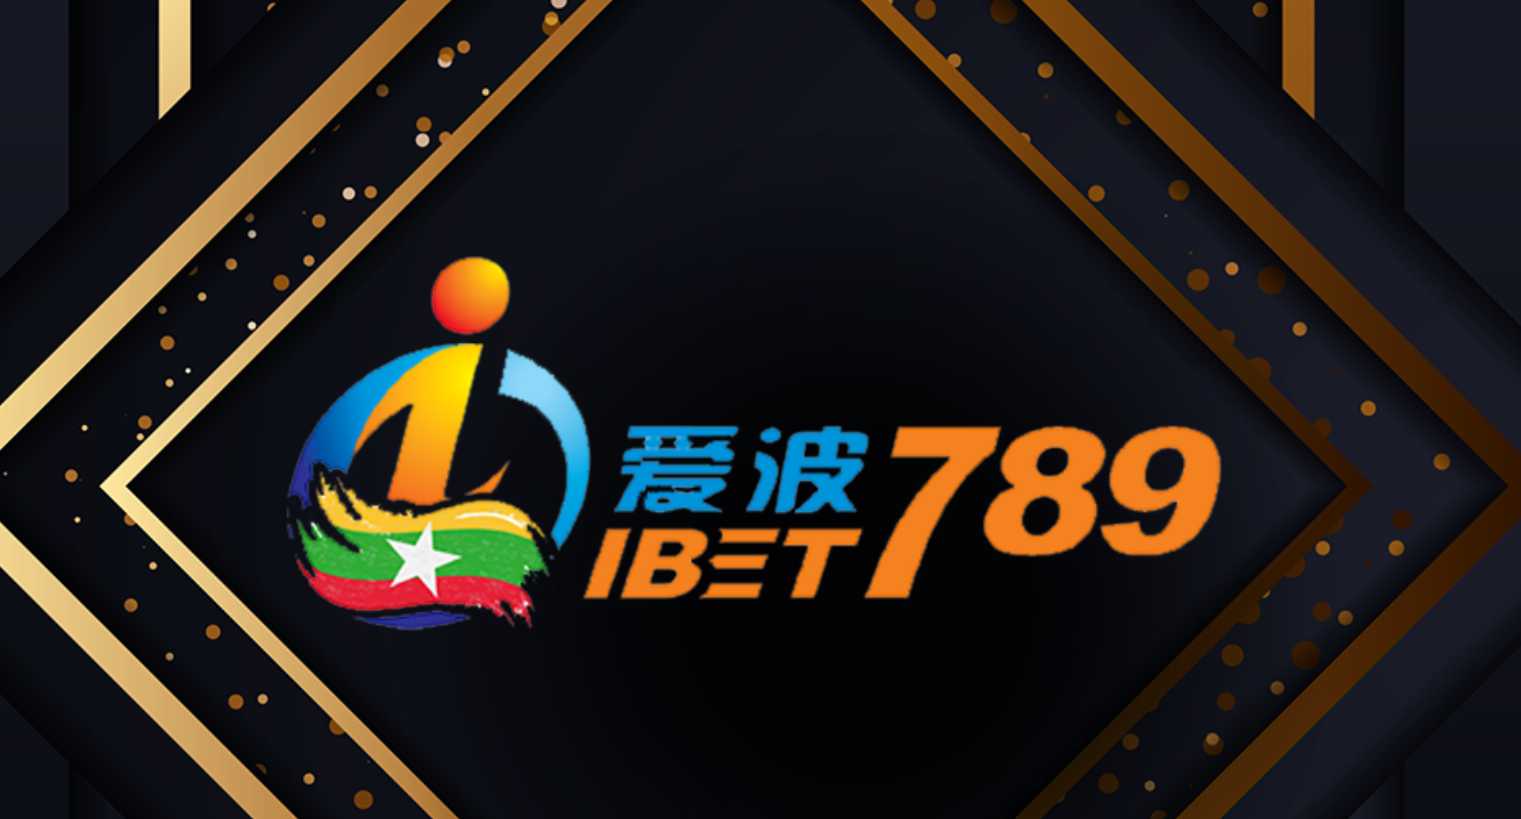 Easiest Registration Process With Best iBet789 Casino